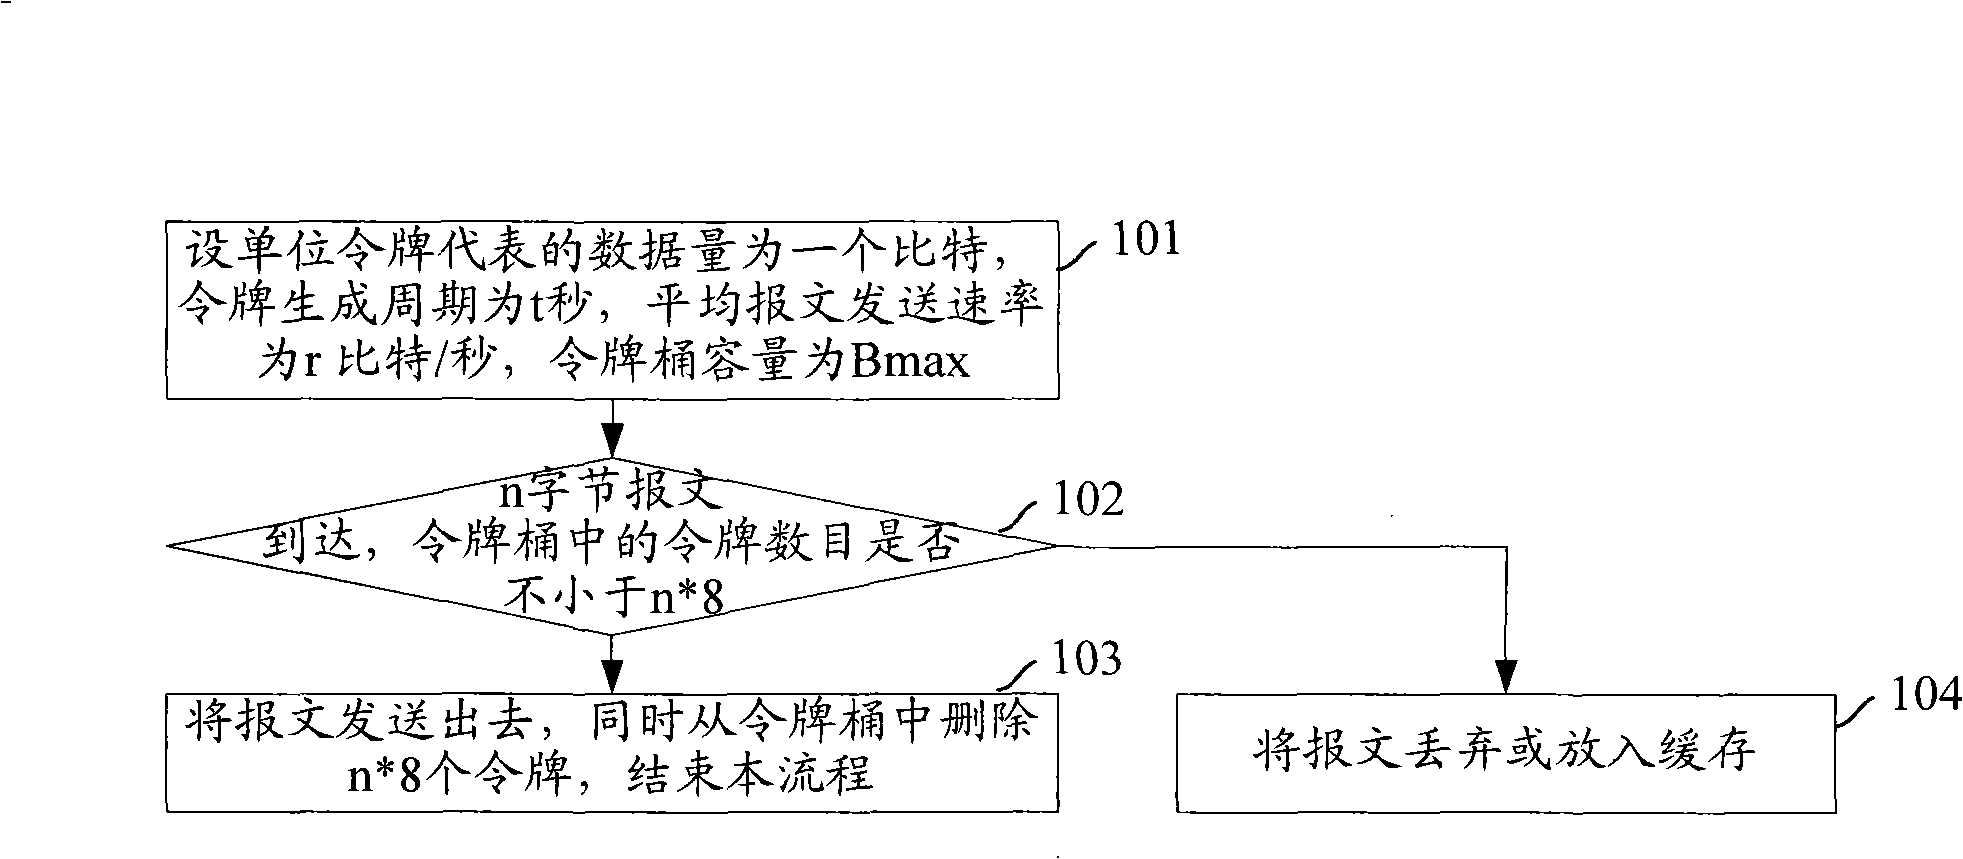 Bandwidth control method for distributed system as well as service plate